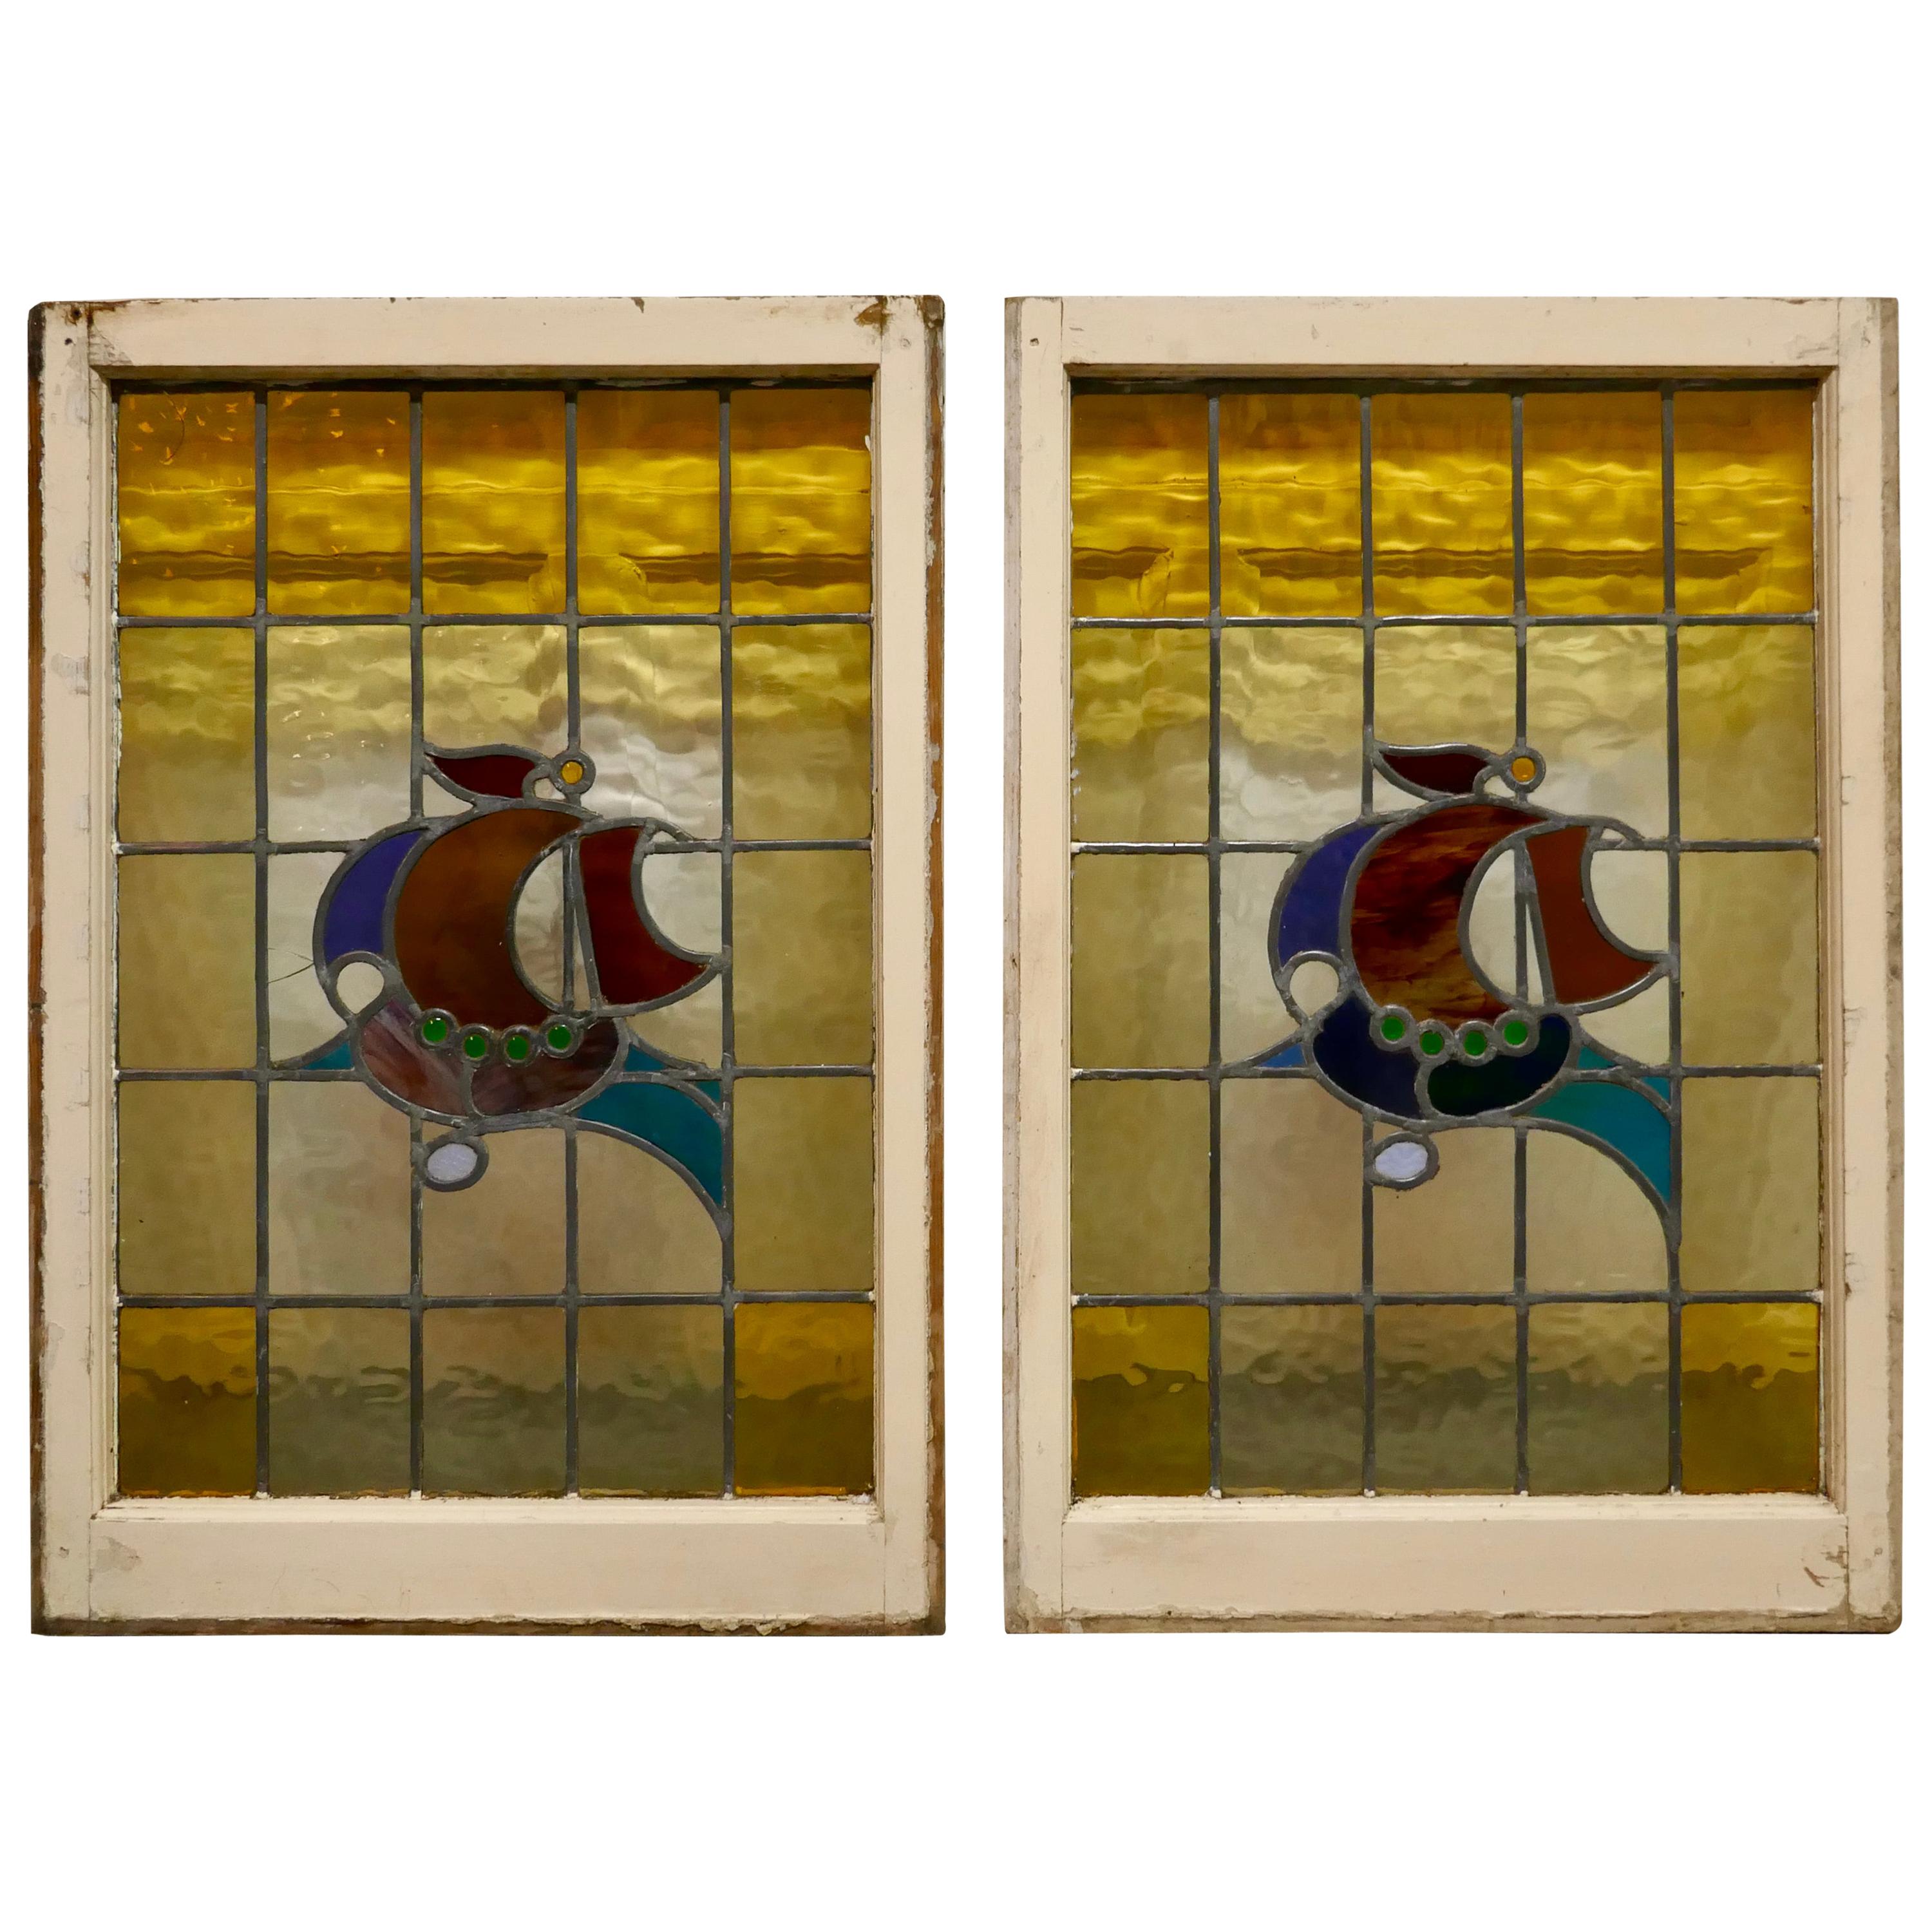 Pair of 19th Century Art Nouveau Stained Glass Windows, with Ships